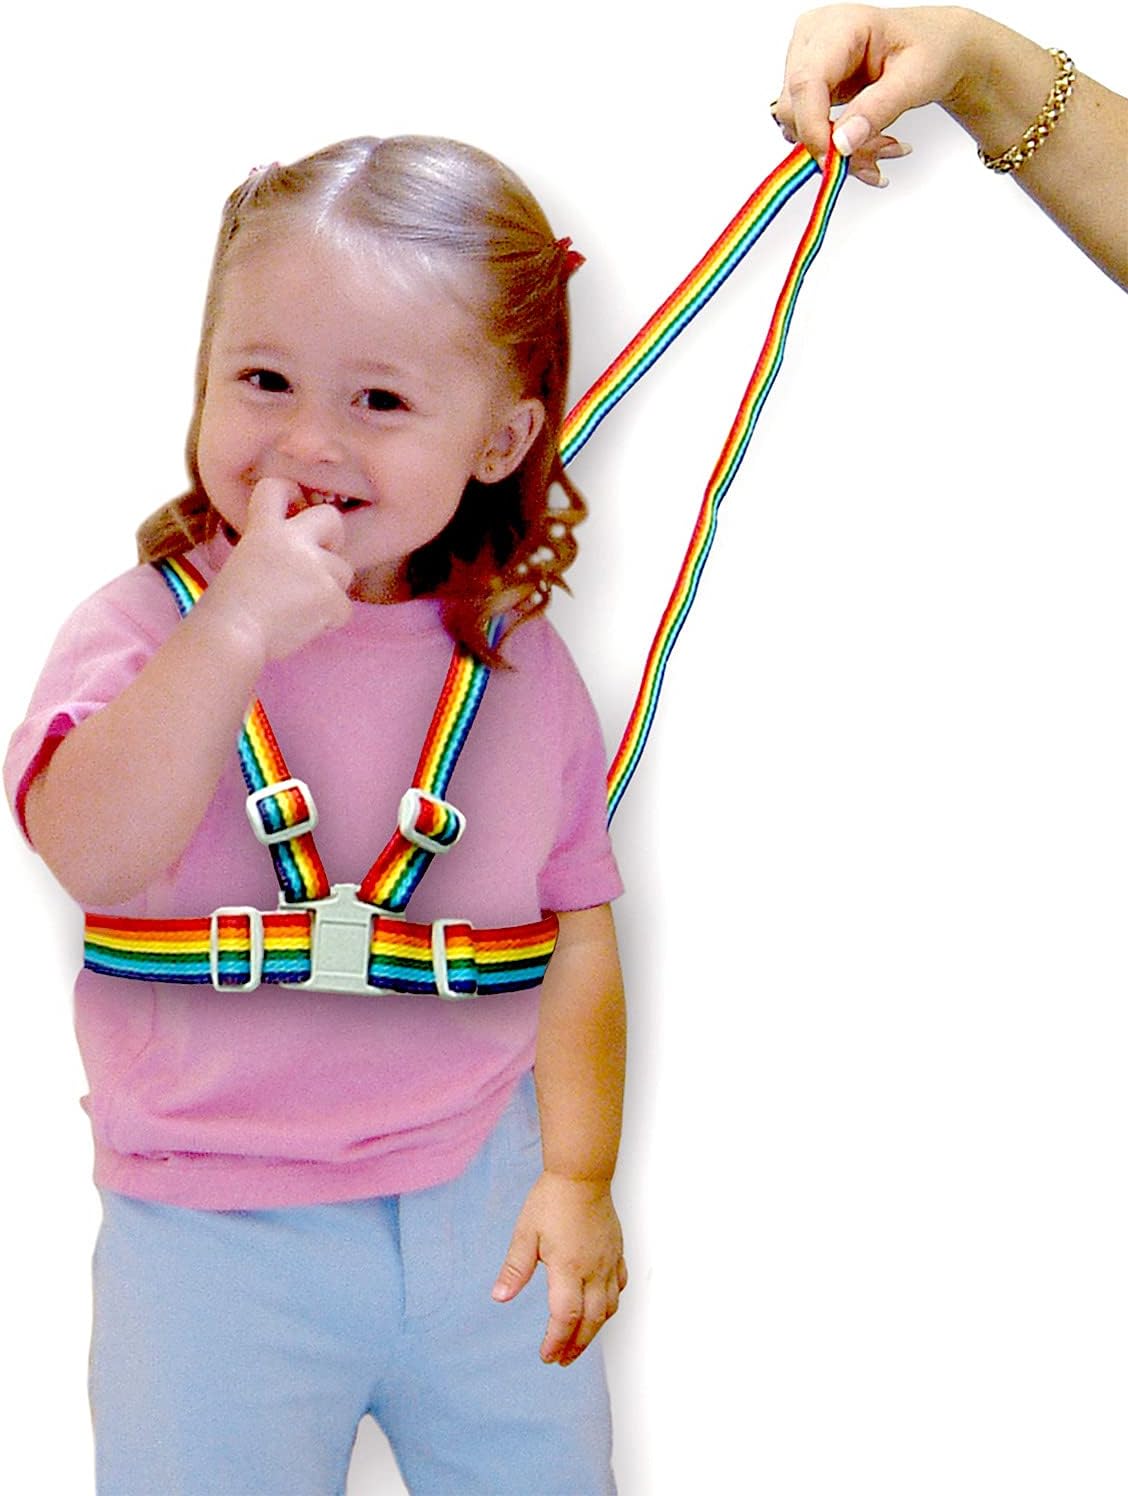 Dreambaby Toddlers Safety Walking Harness & Reins - with Anchor Straps for High Chair, Strollers, Buggy & Pram - Suitable for Ages 6 months to 4 years